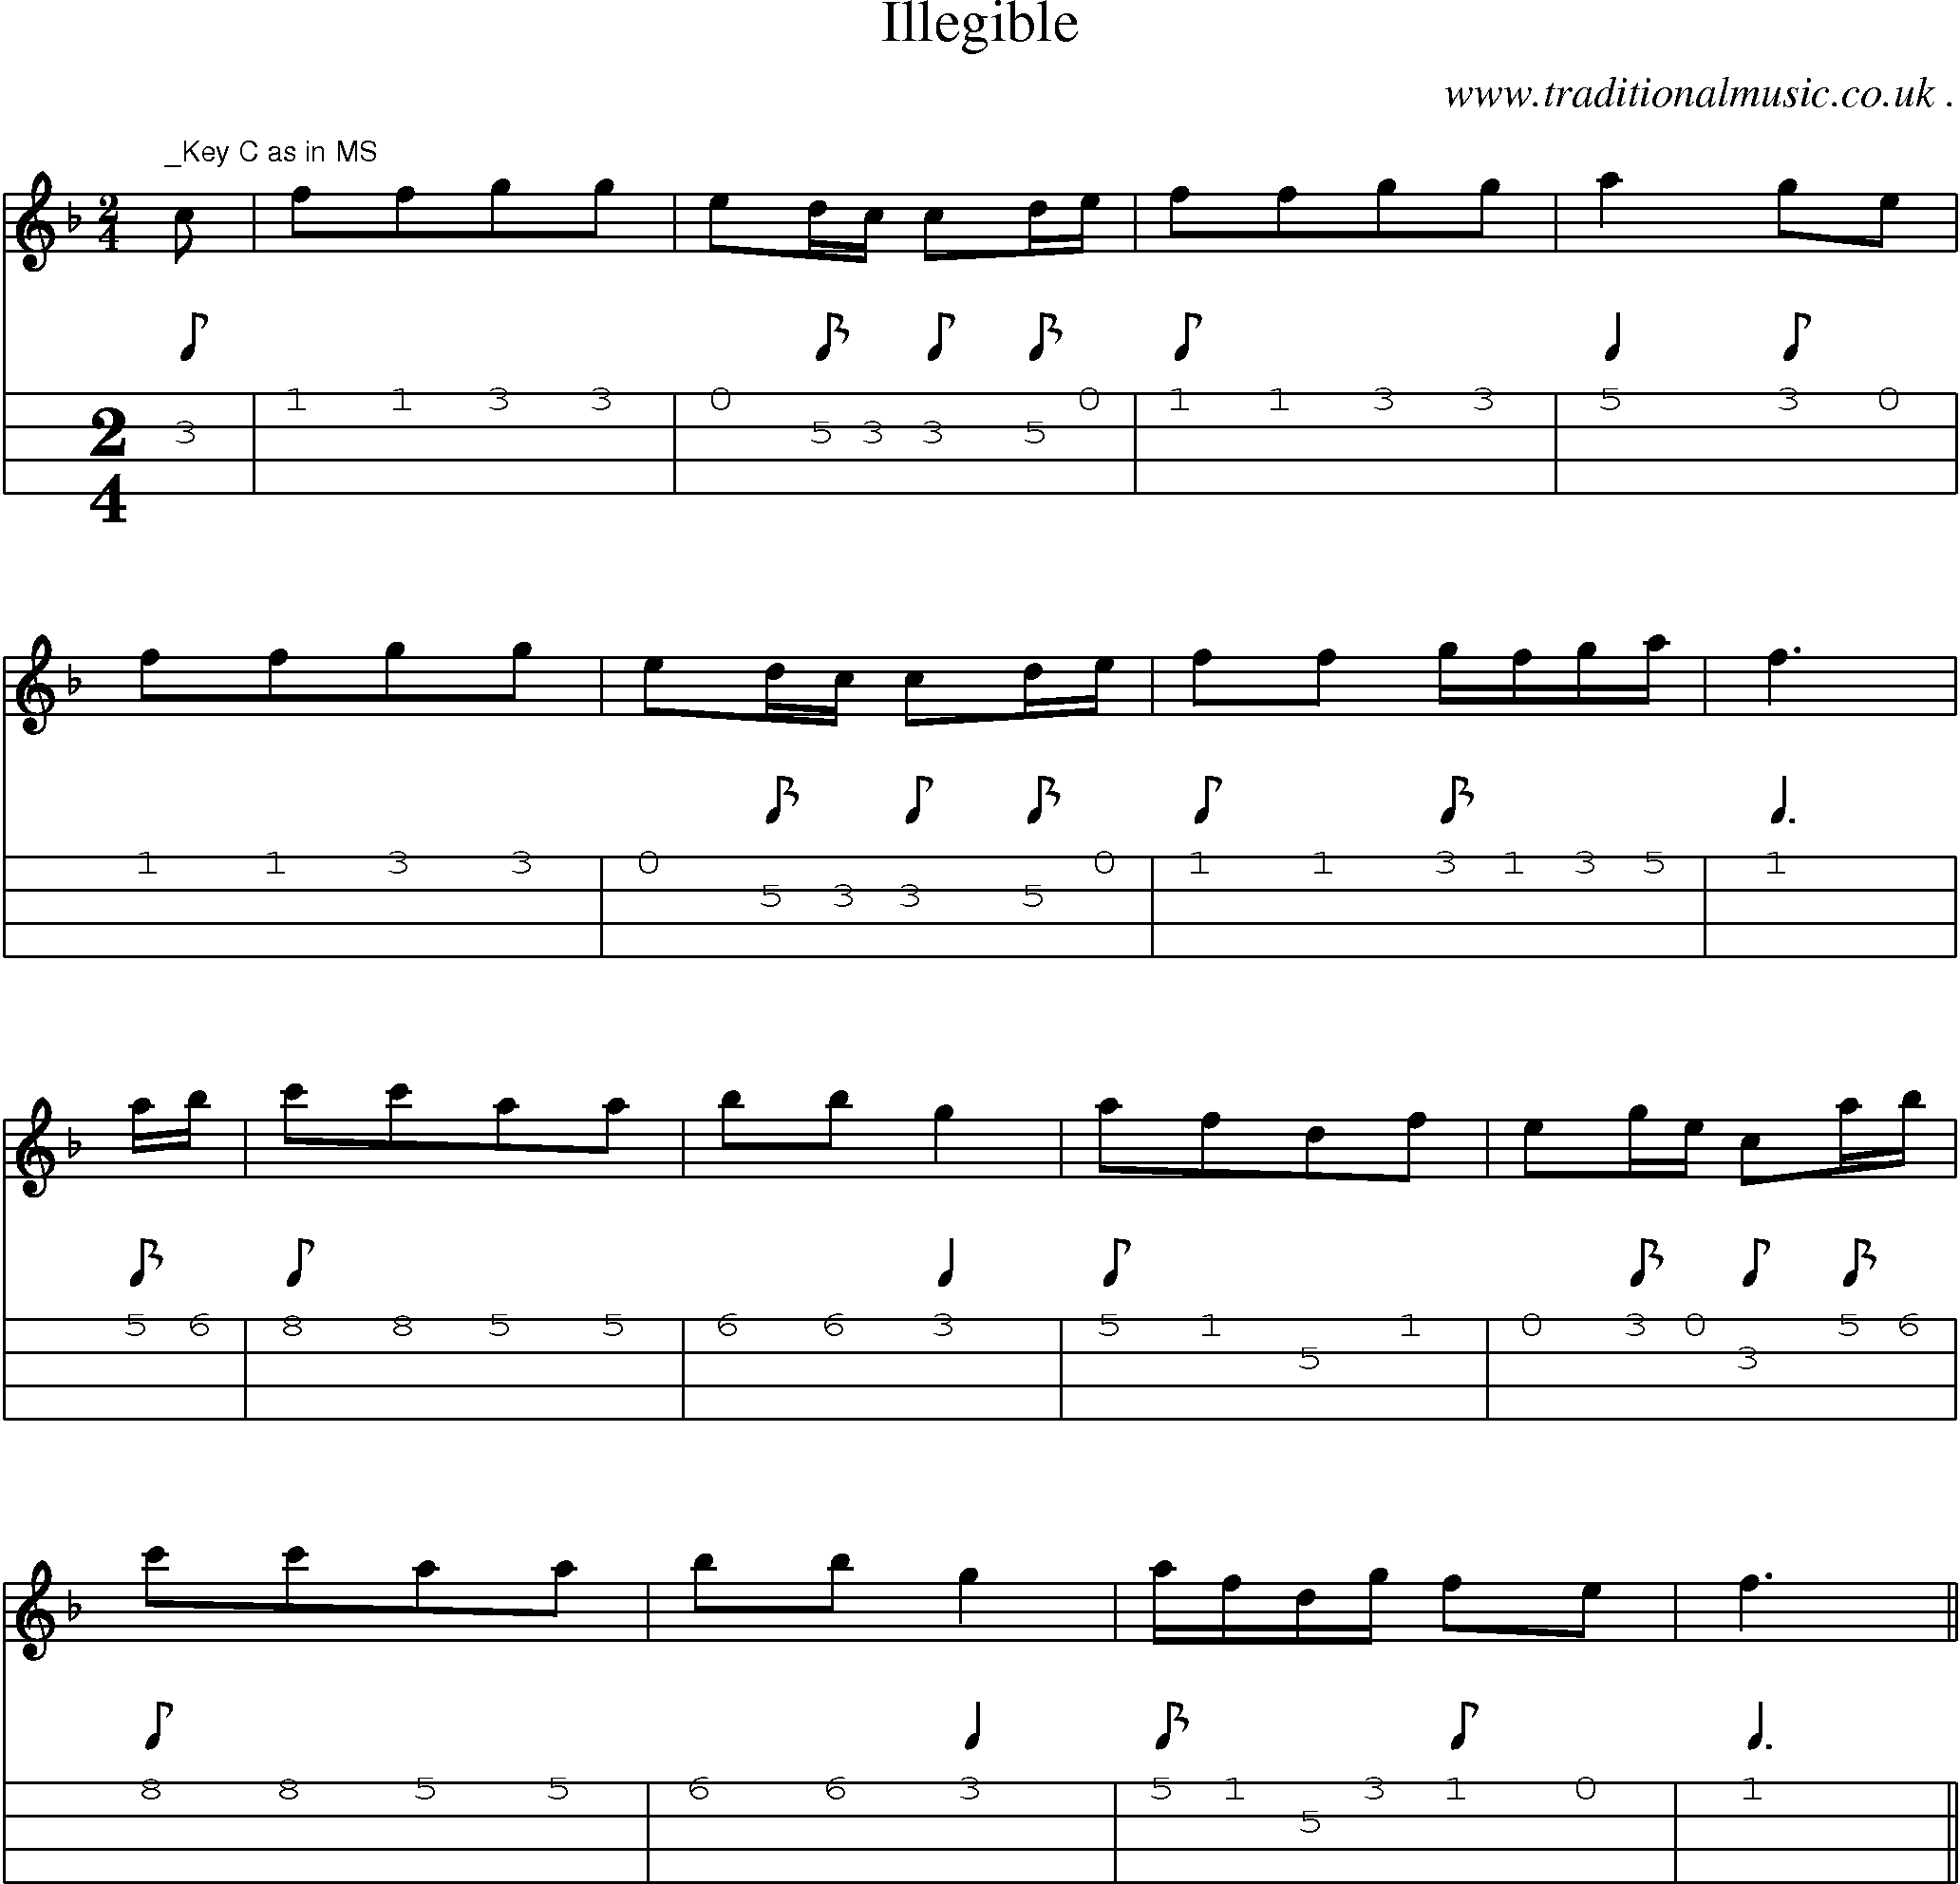 Sheet-Music and Mandolin Tabs for Illegible